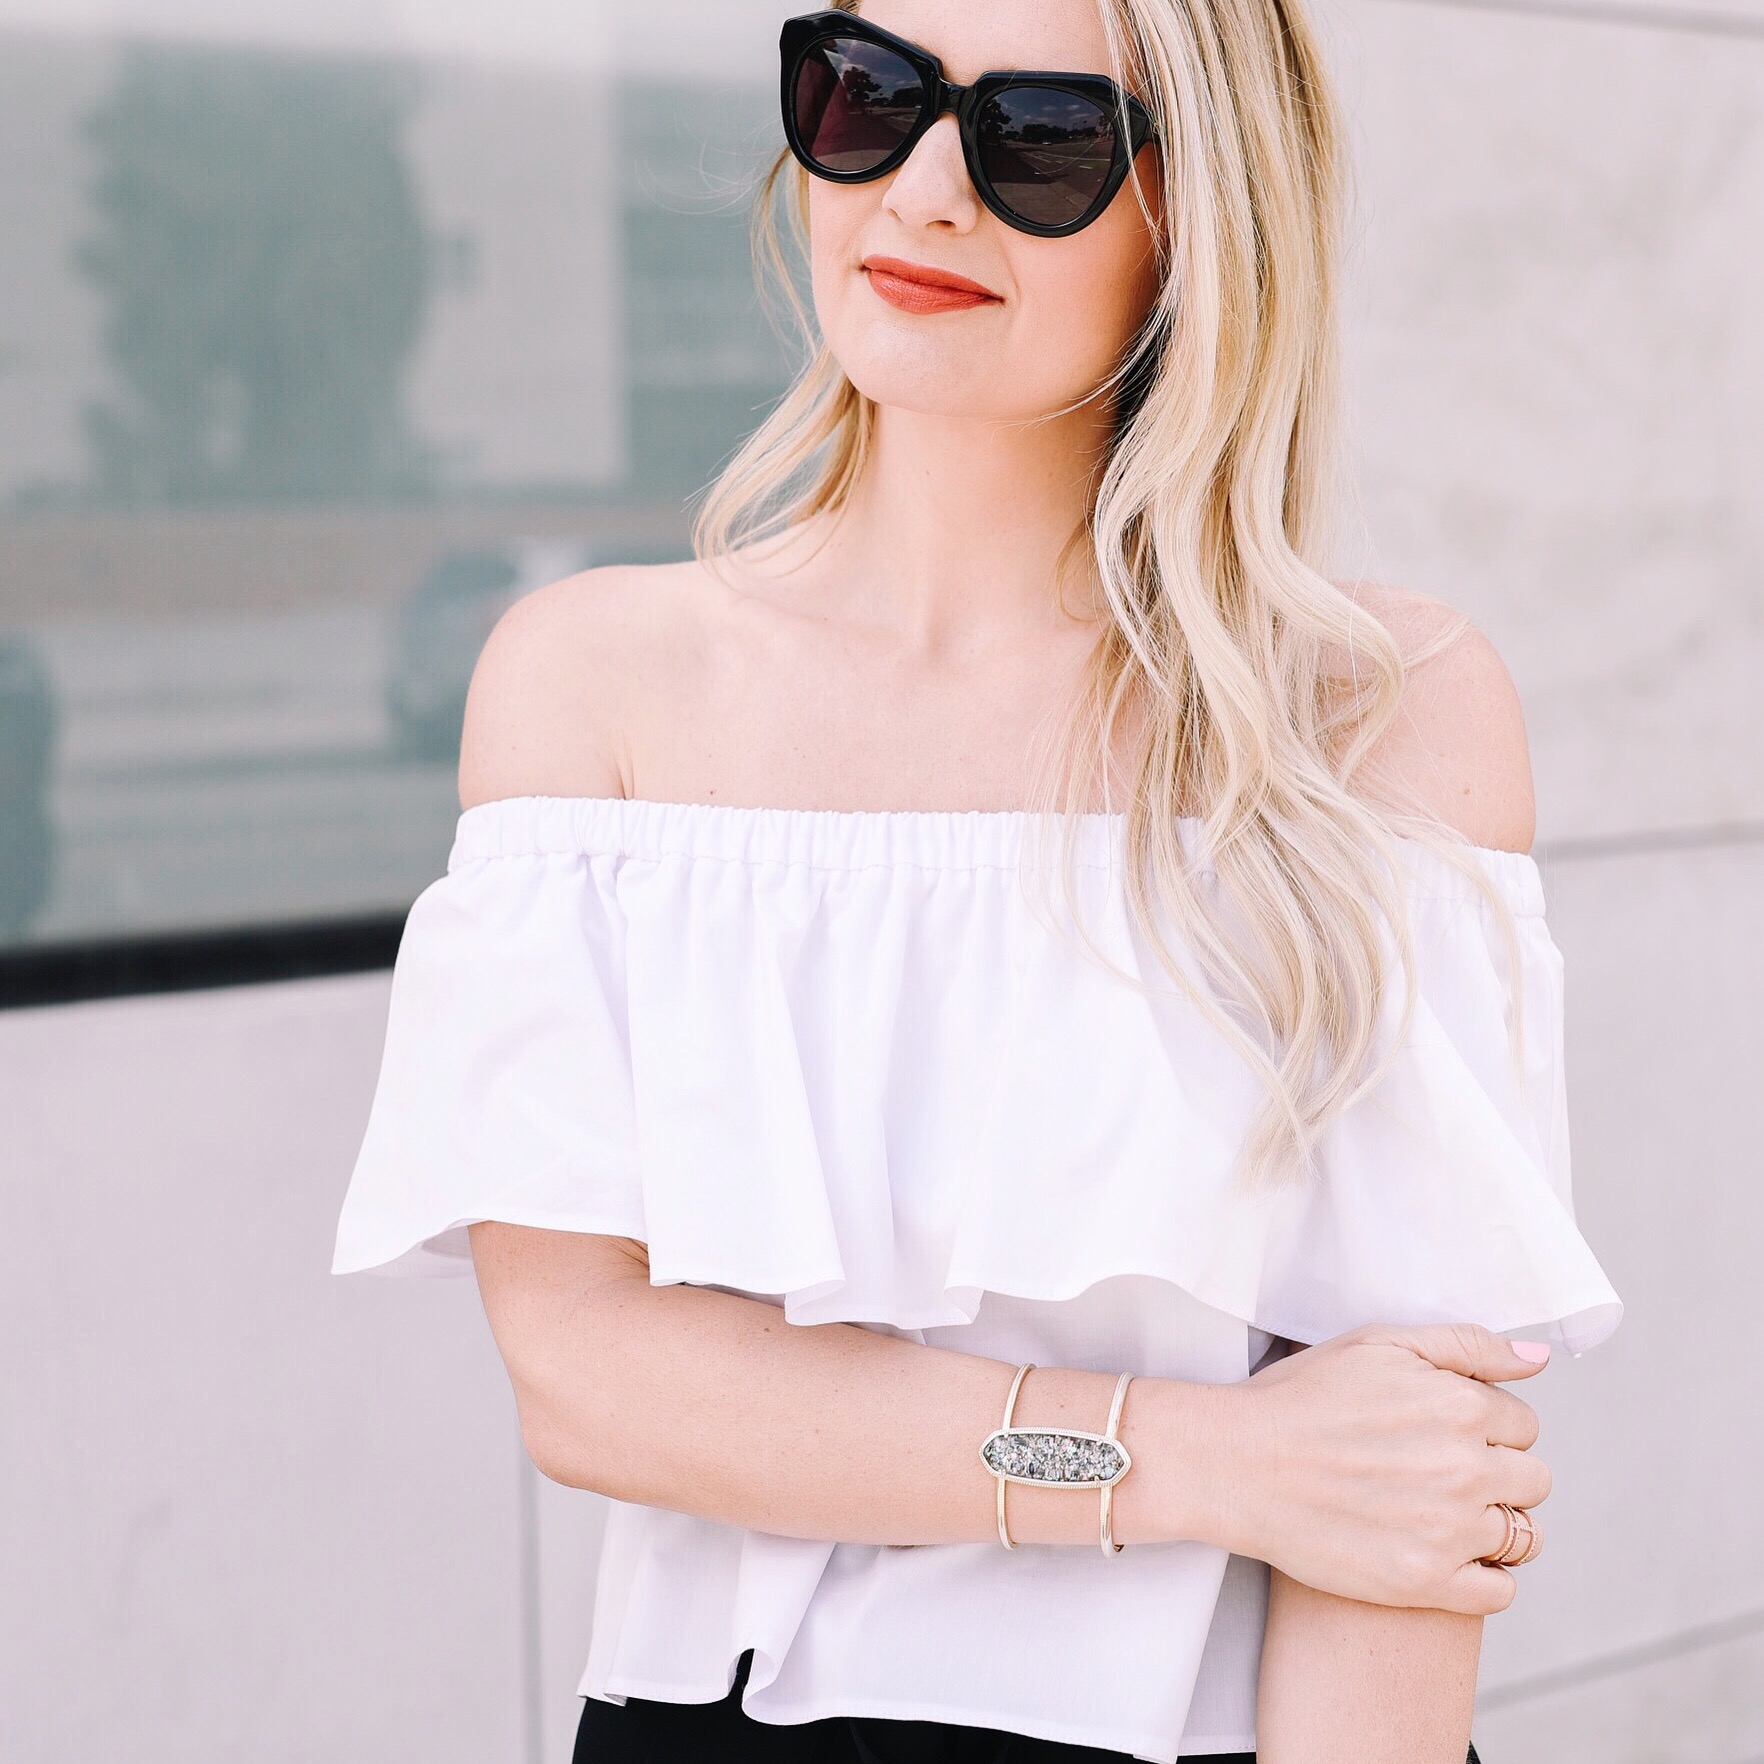 Love this simple white off the shoulder top! Under $50 too! 